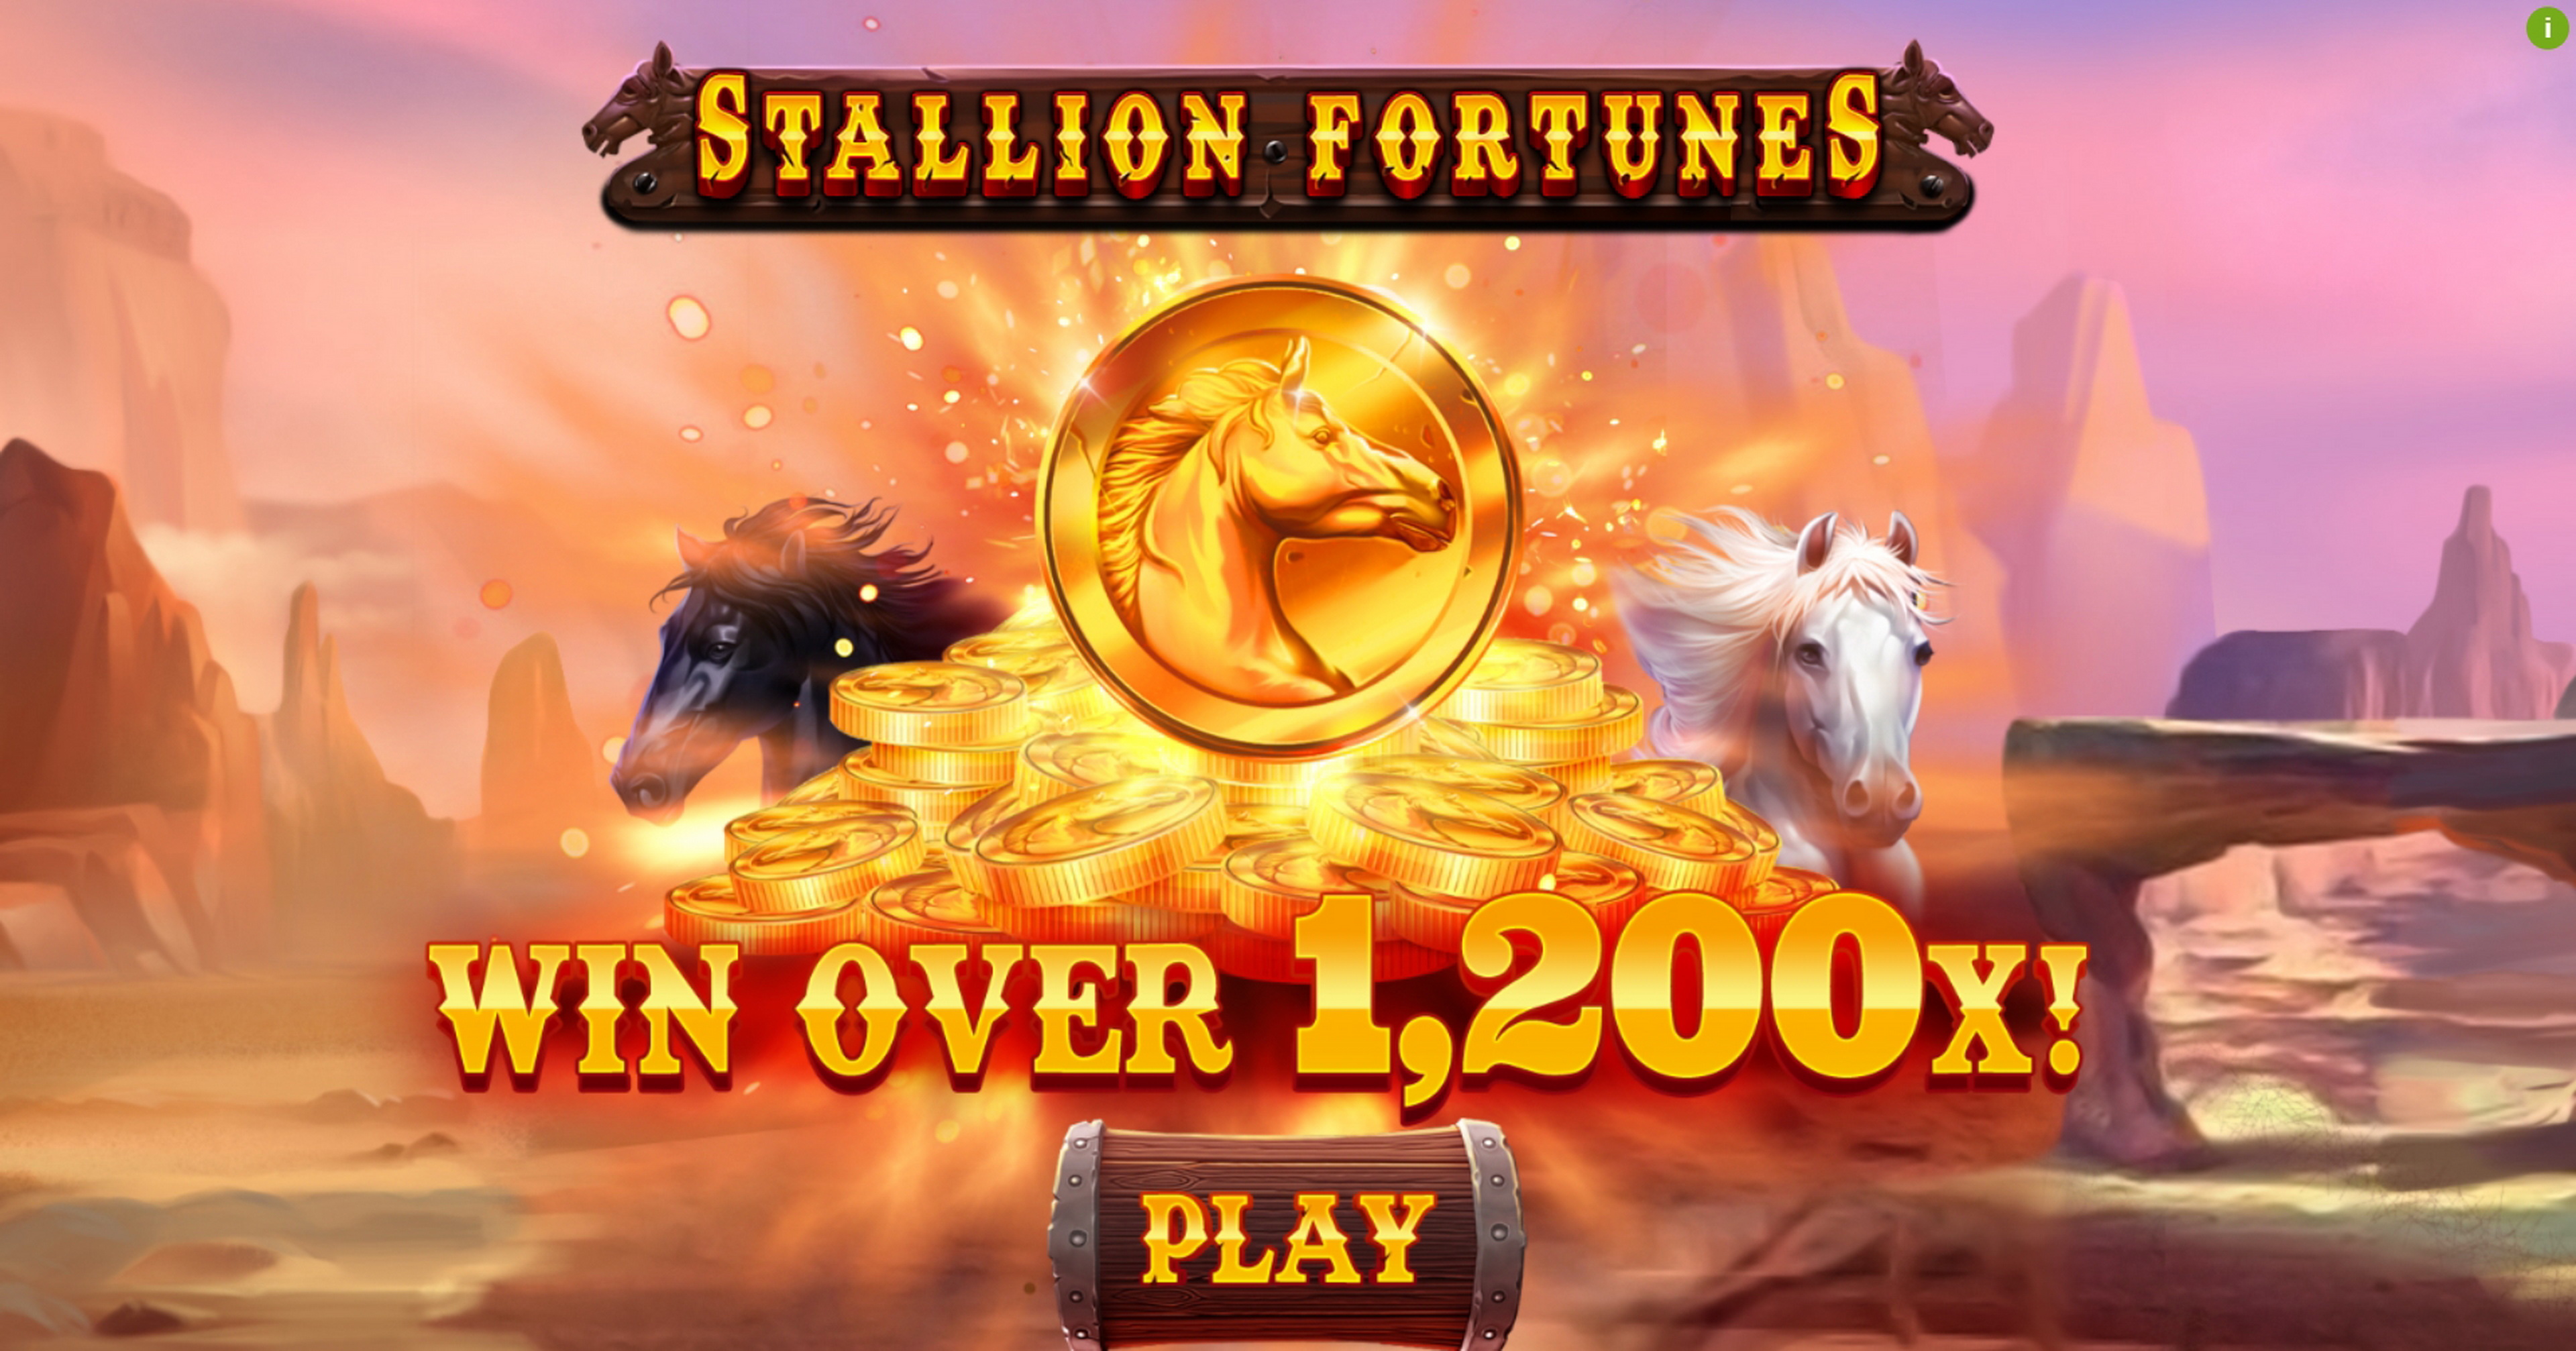 Play Stallion Fortunes Free Casino Slot Game by PariPlay